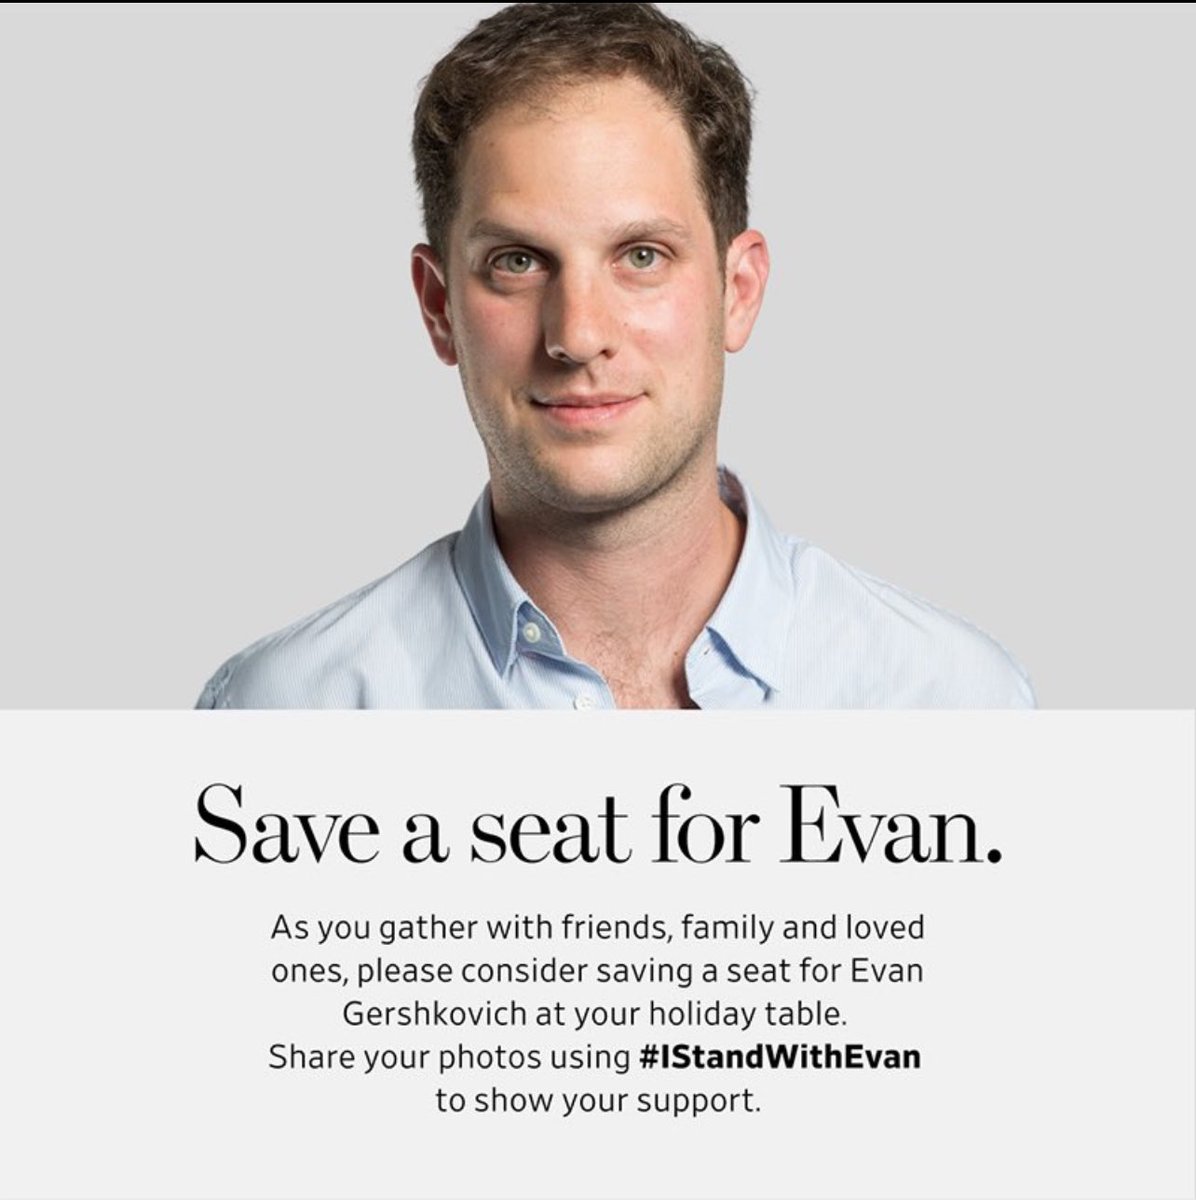 I sent Evan a letter this week letting him know I’d be saving a seat for him at my Thanksgiving table. A reminder that writing to Evan is a great way to keep his spirits up, especially now that it’s holiday time. You can send him letters here: freegershkovich@gmail.com